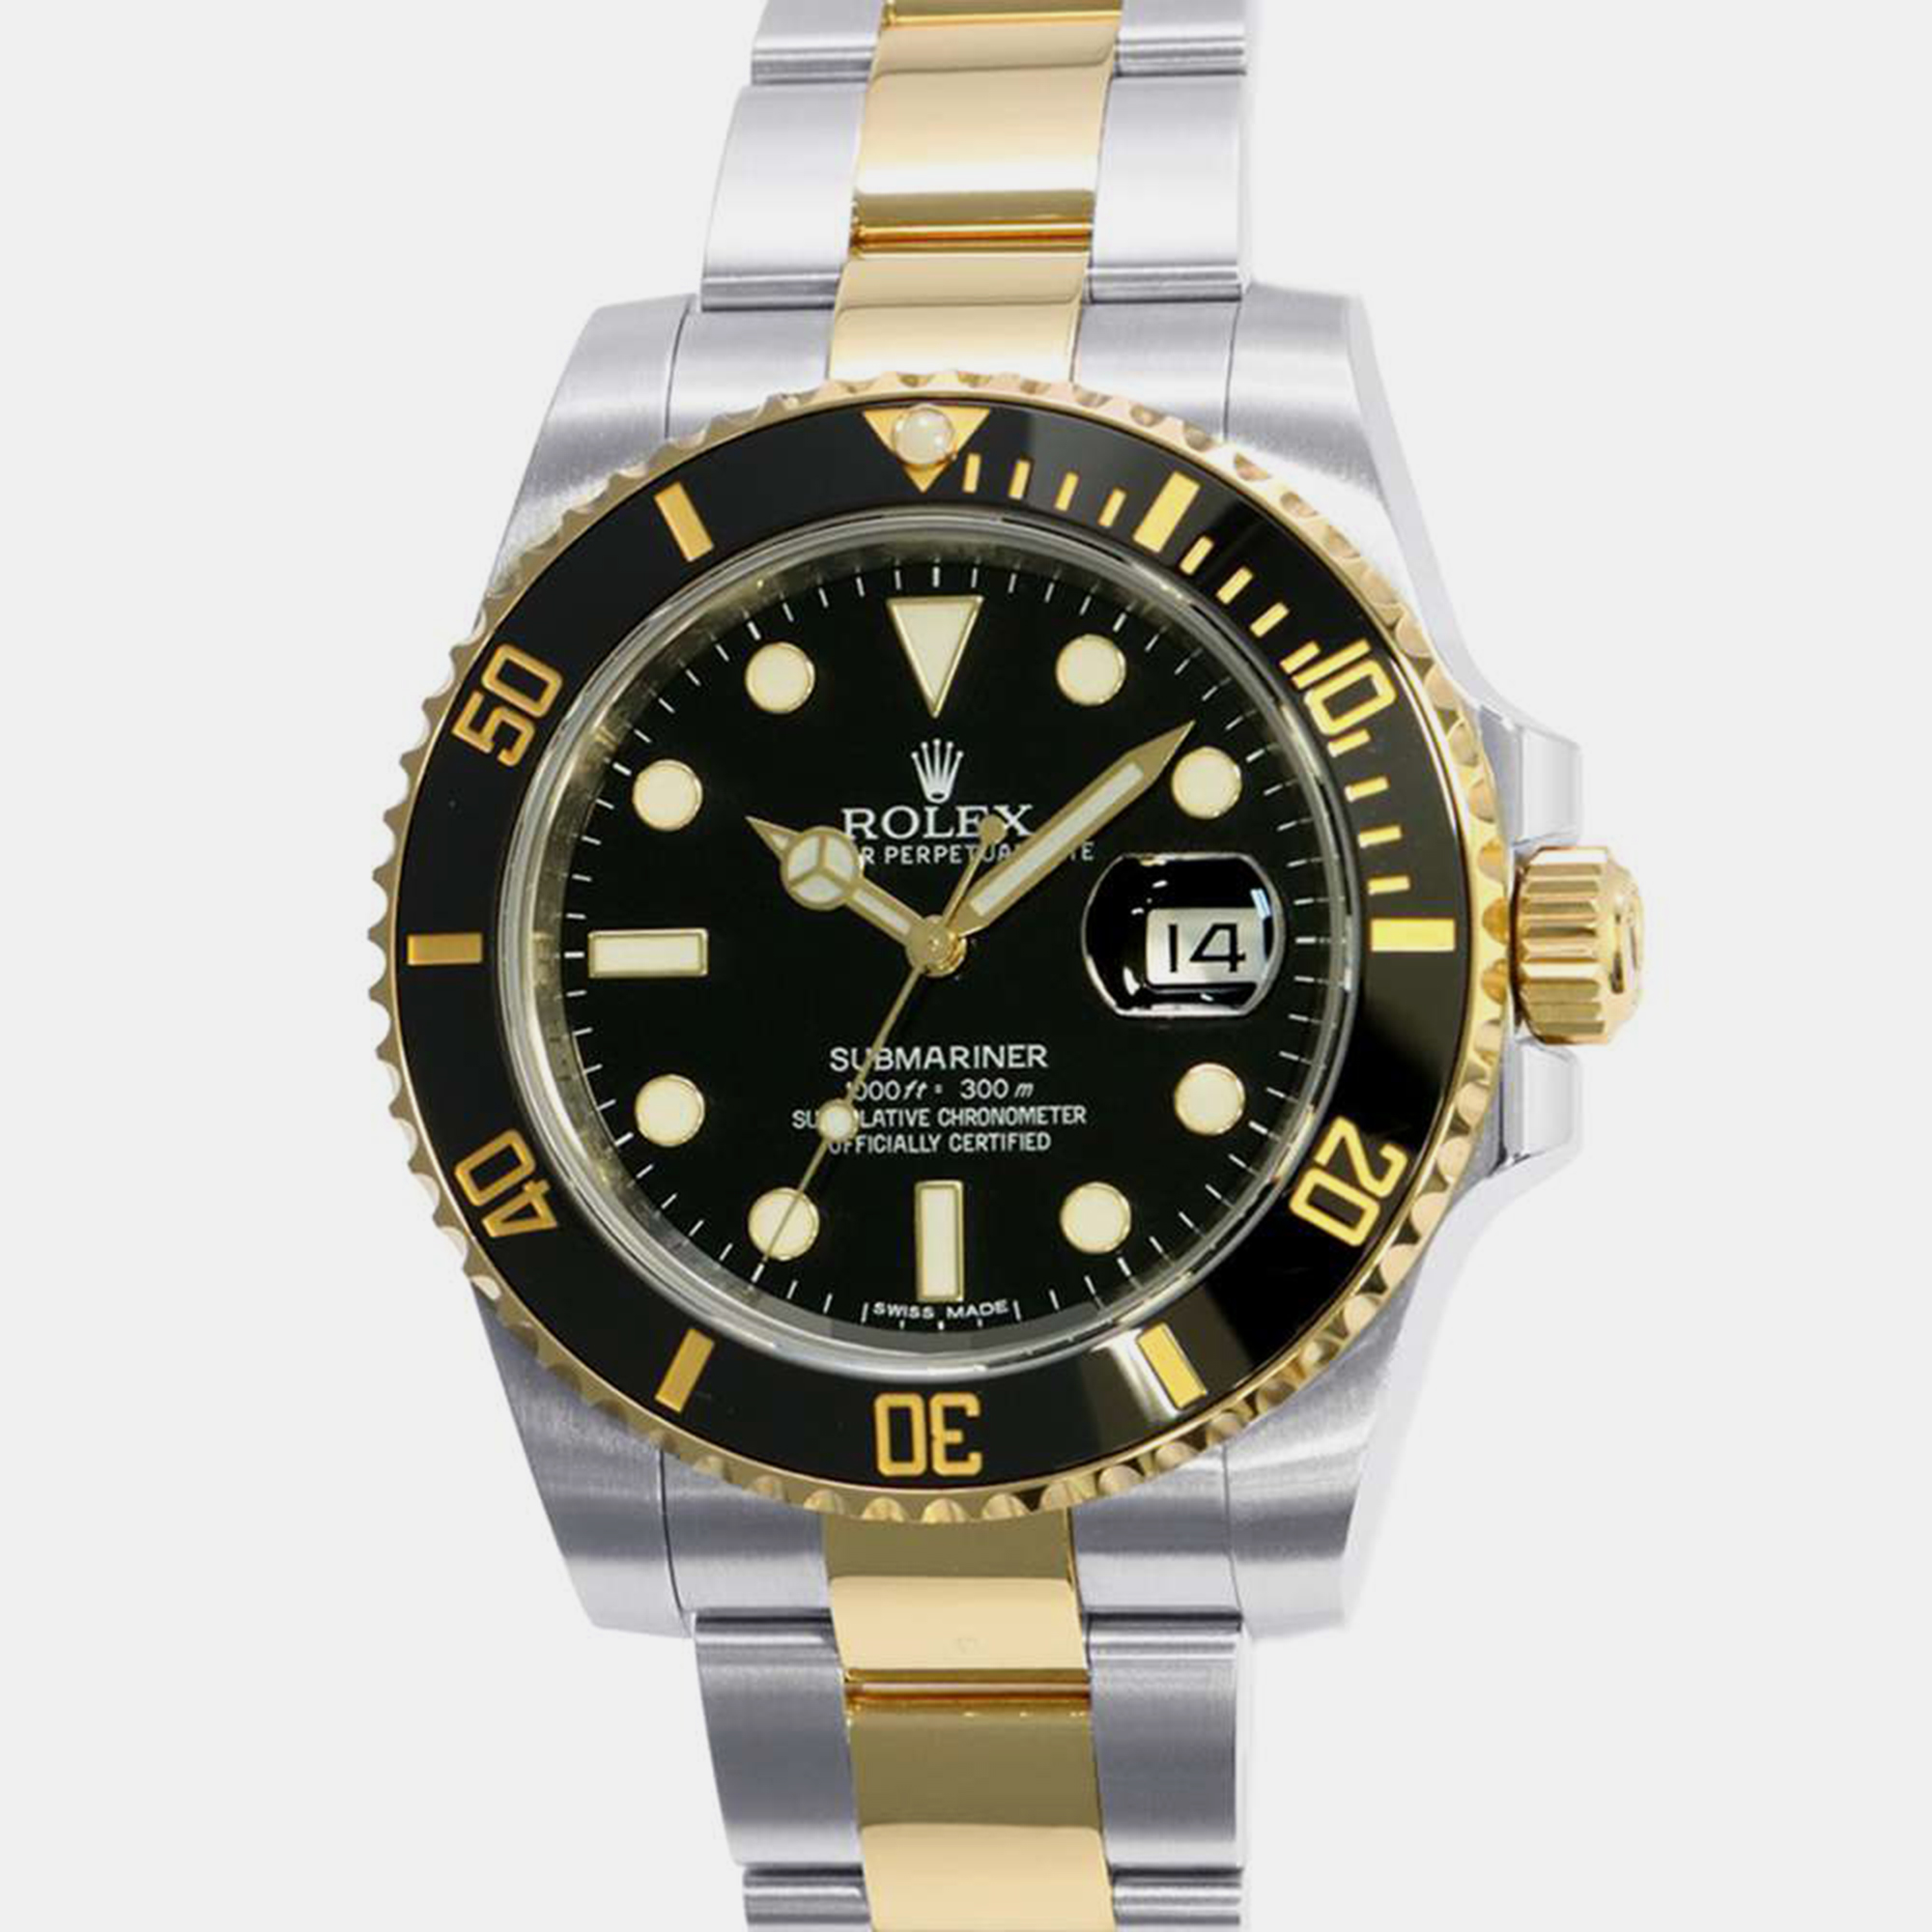 Rolex black 18k yellow gold stainless steel submariner 116613ln automatic men's wristwatch 40 mm